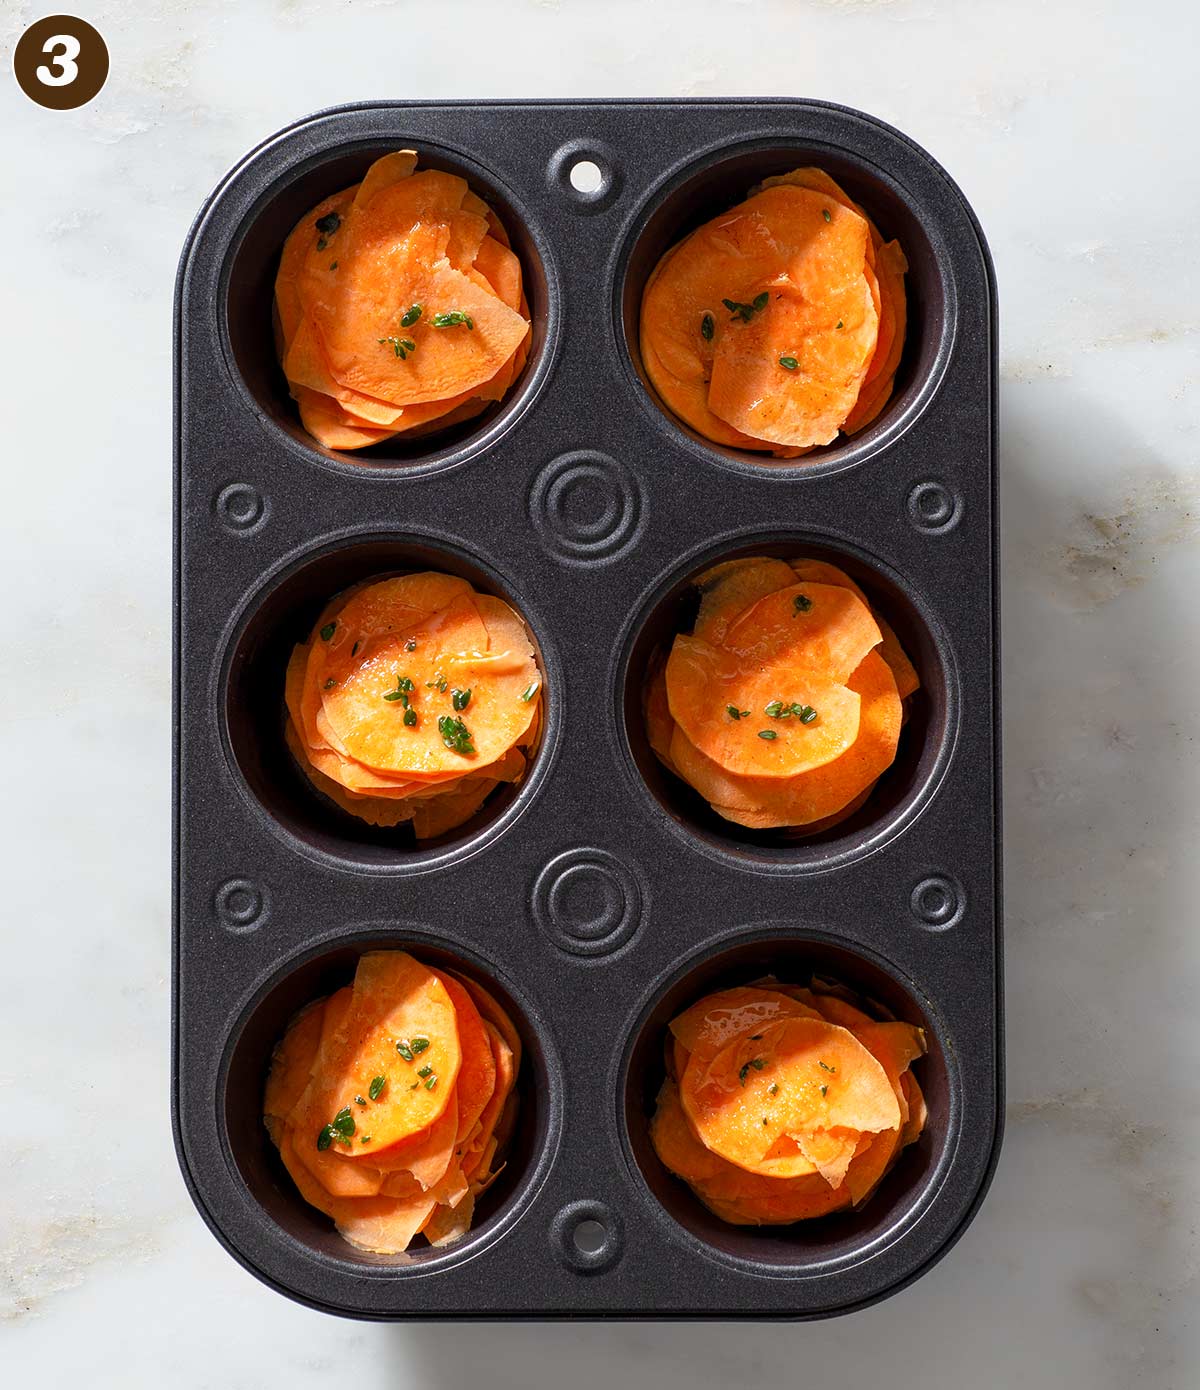 Unbaked sweet potato stacks in a muffin pan.